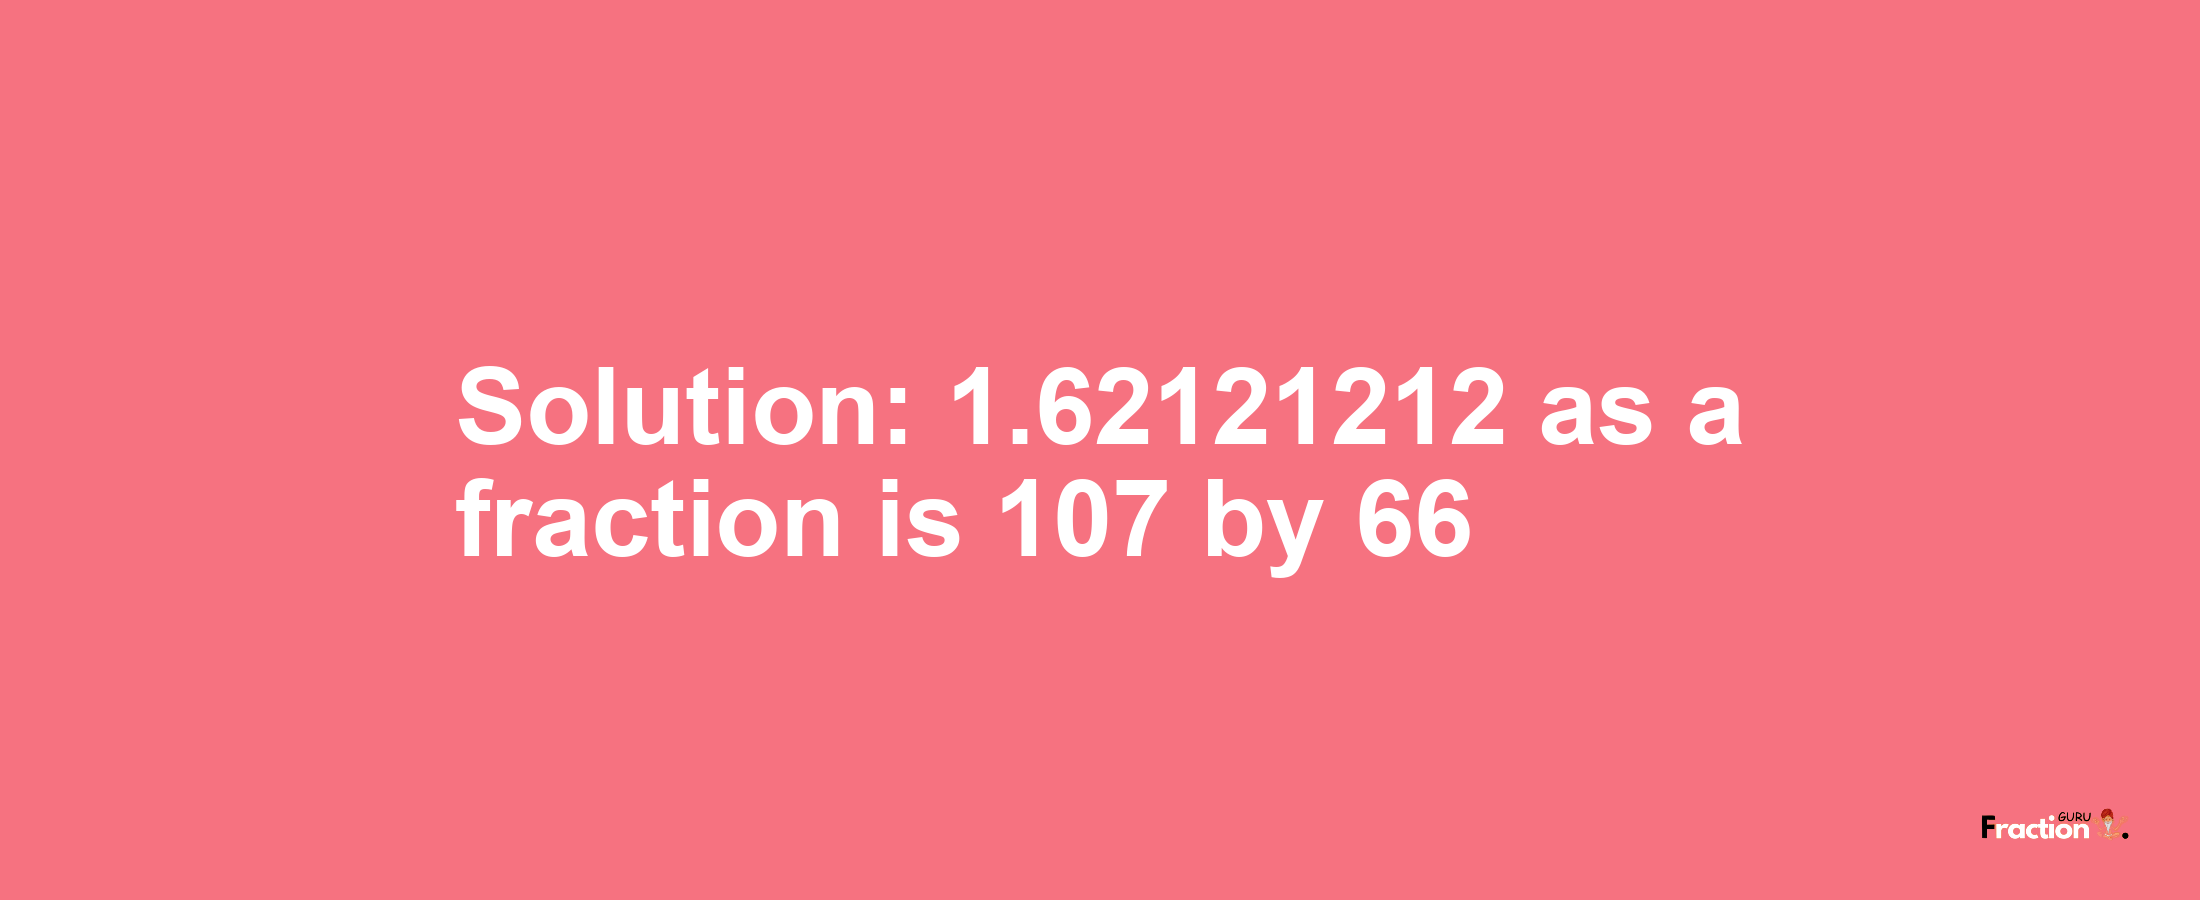 Solution:1.62121212 as a fraction is 107/66